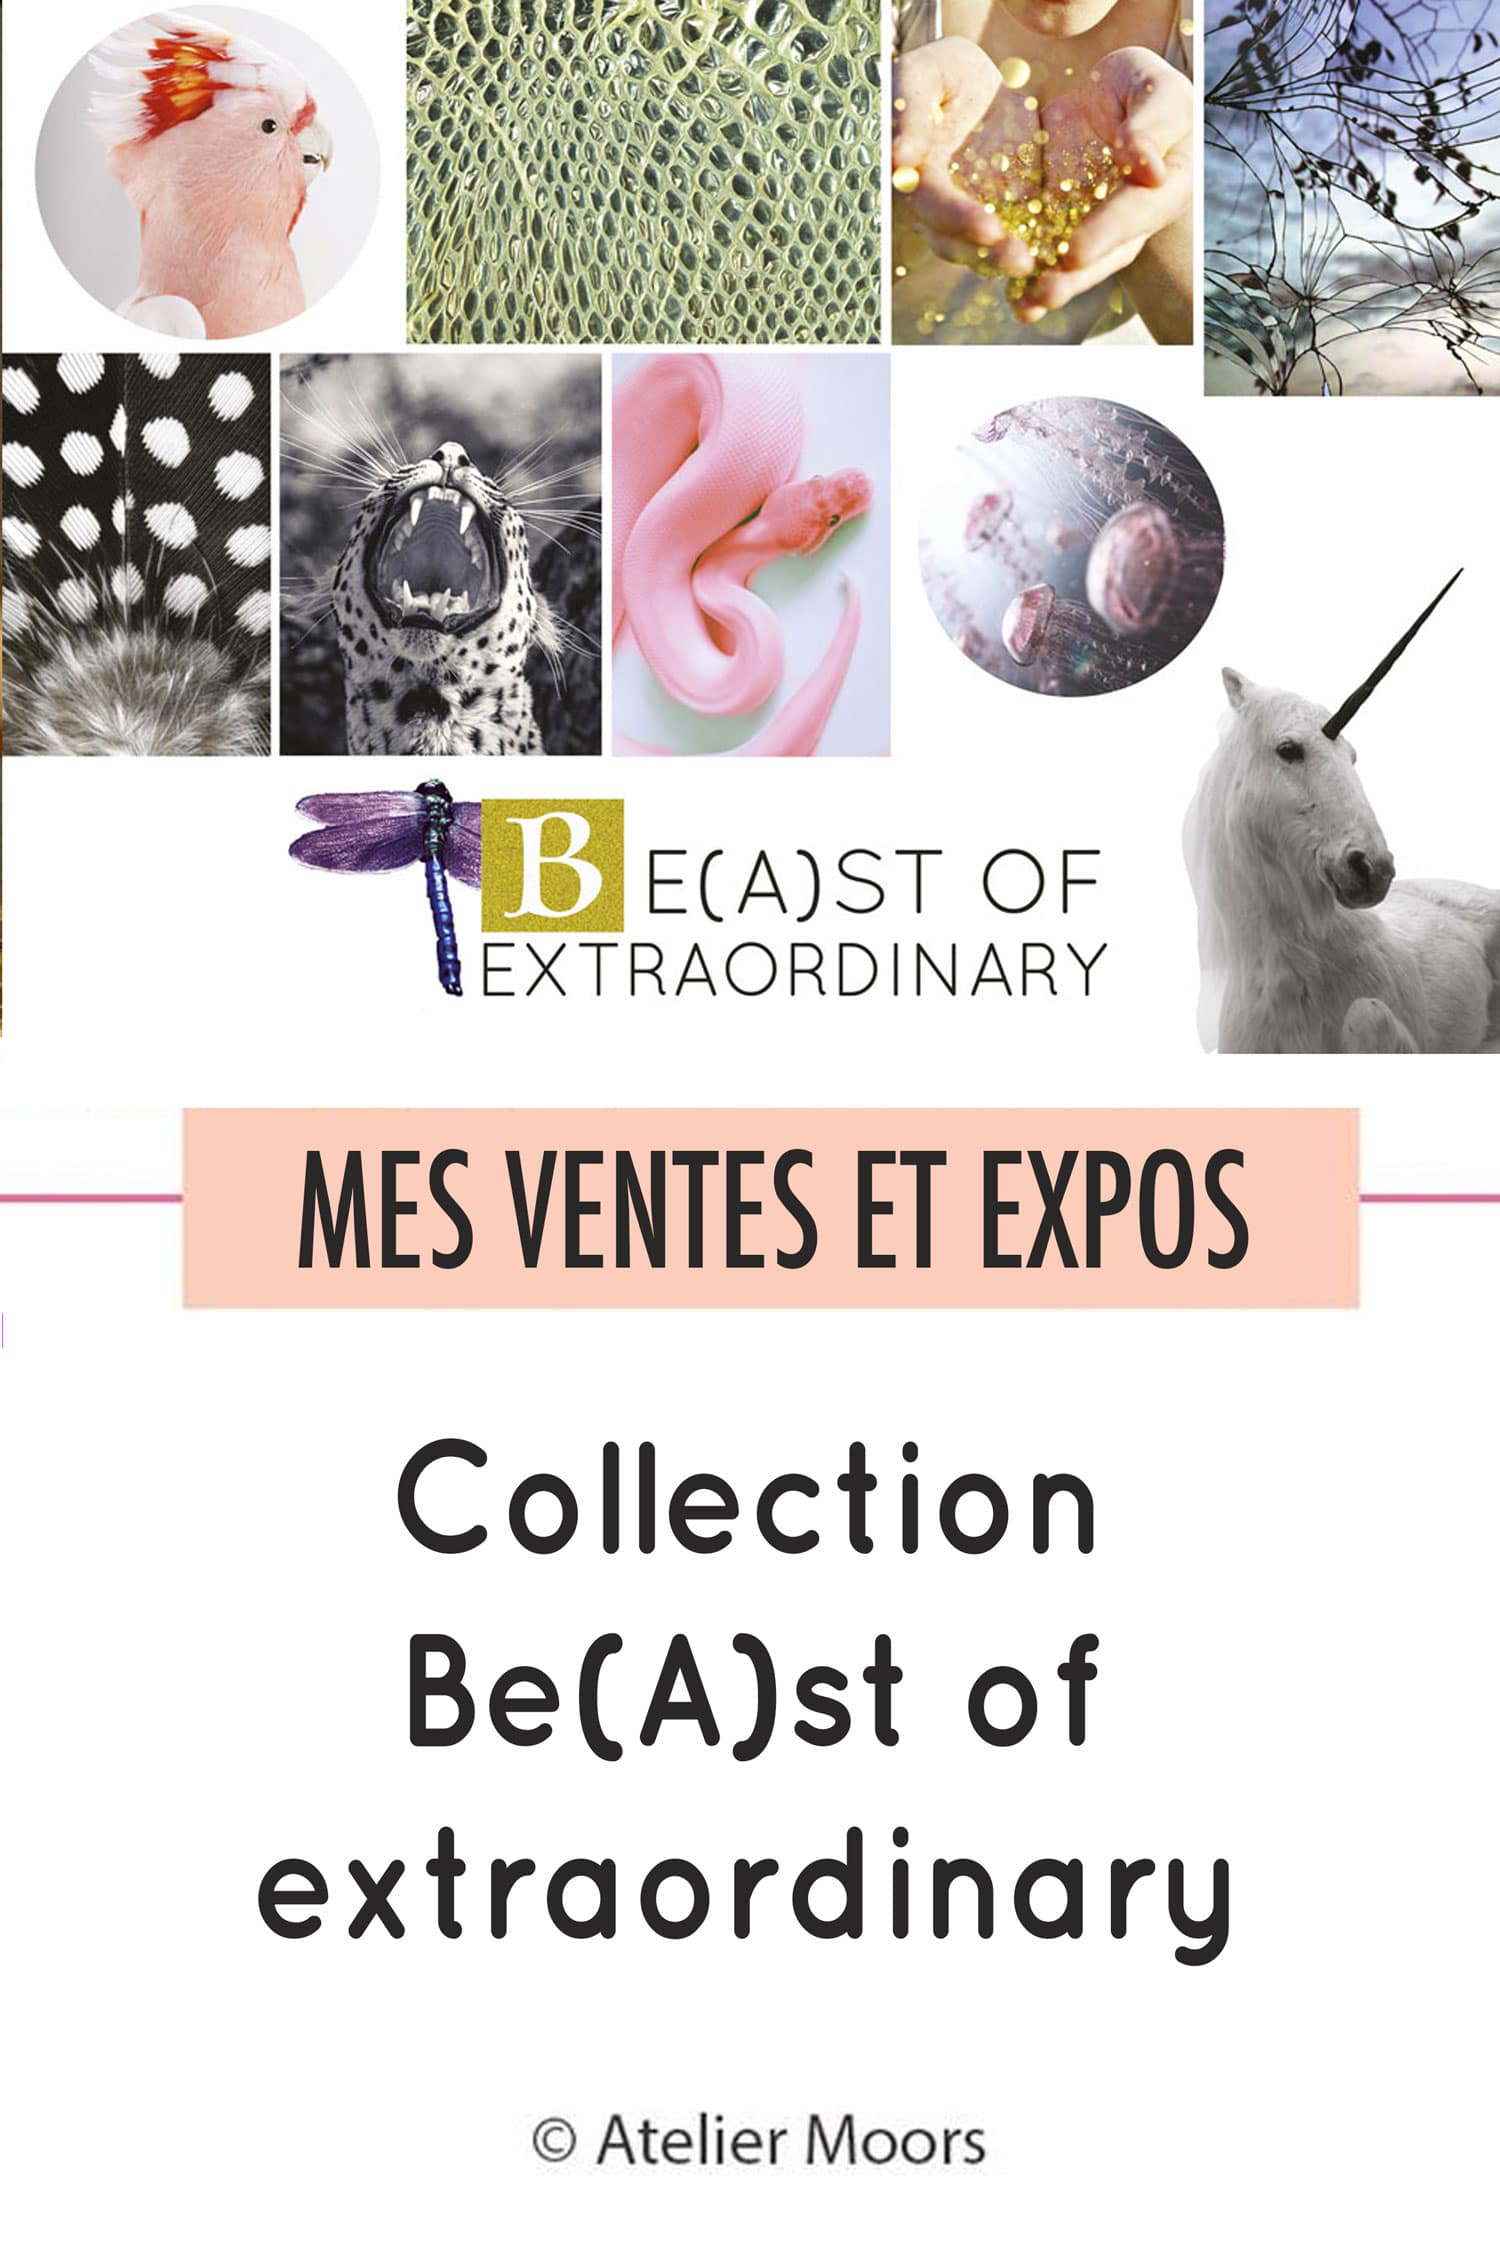 Collection Beast of extraordinary Atelier Moors